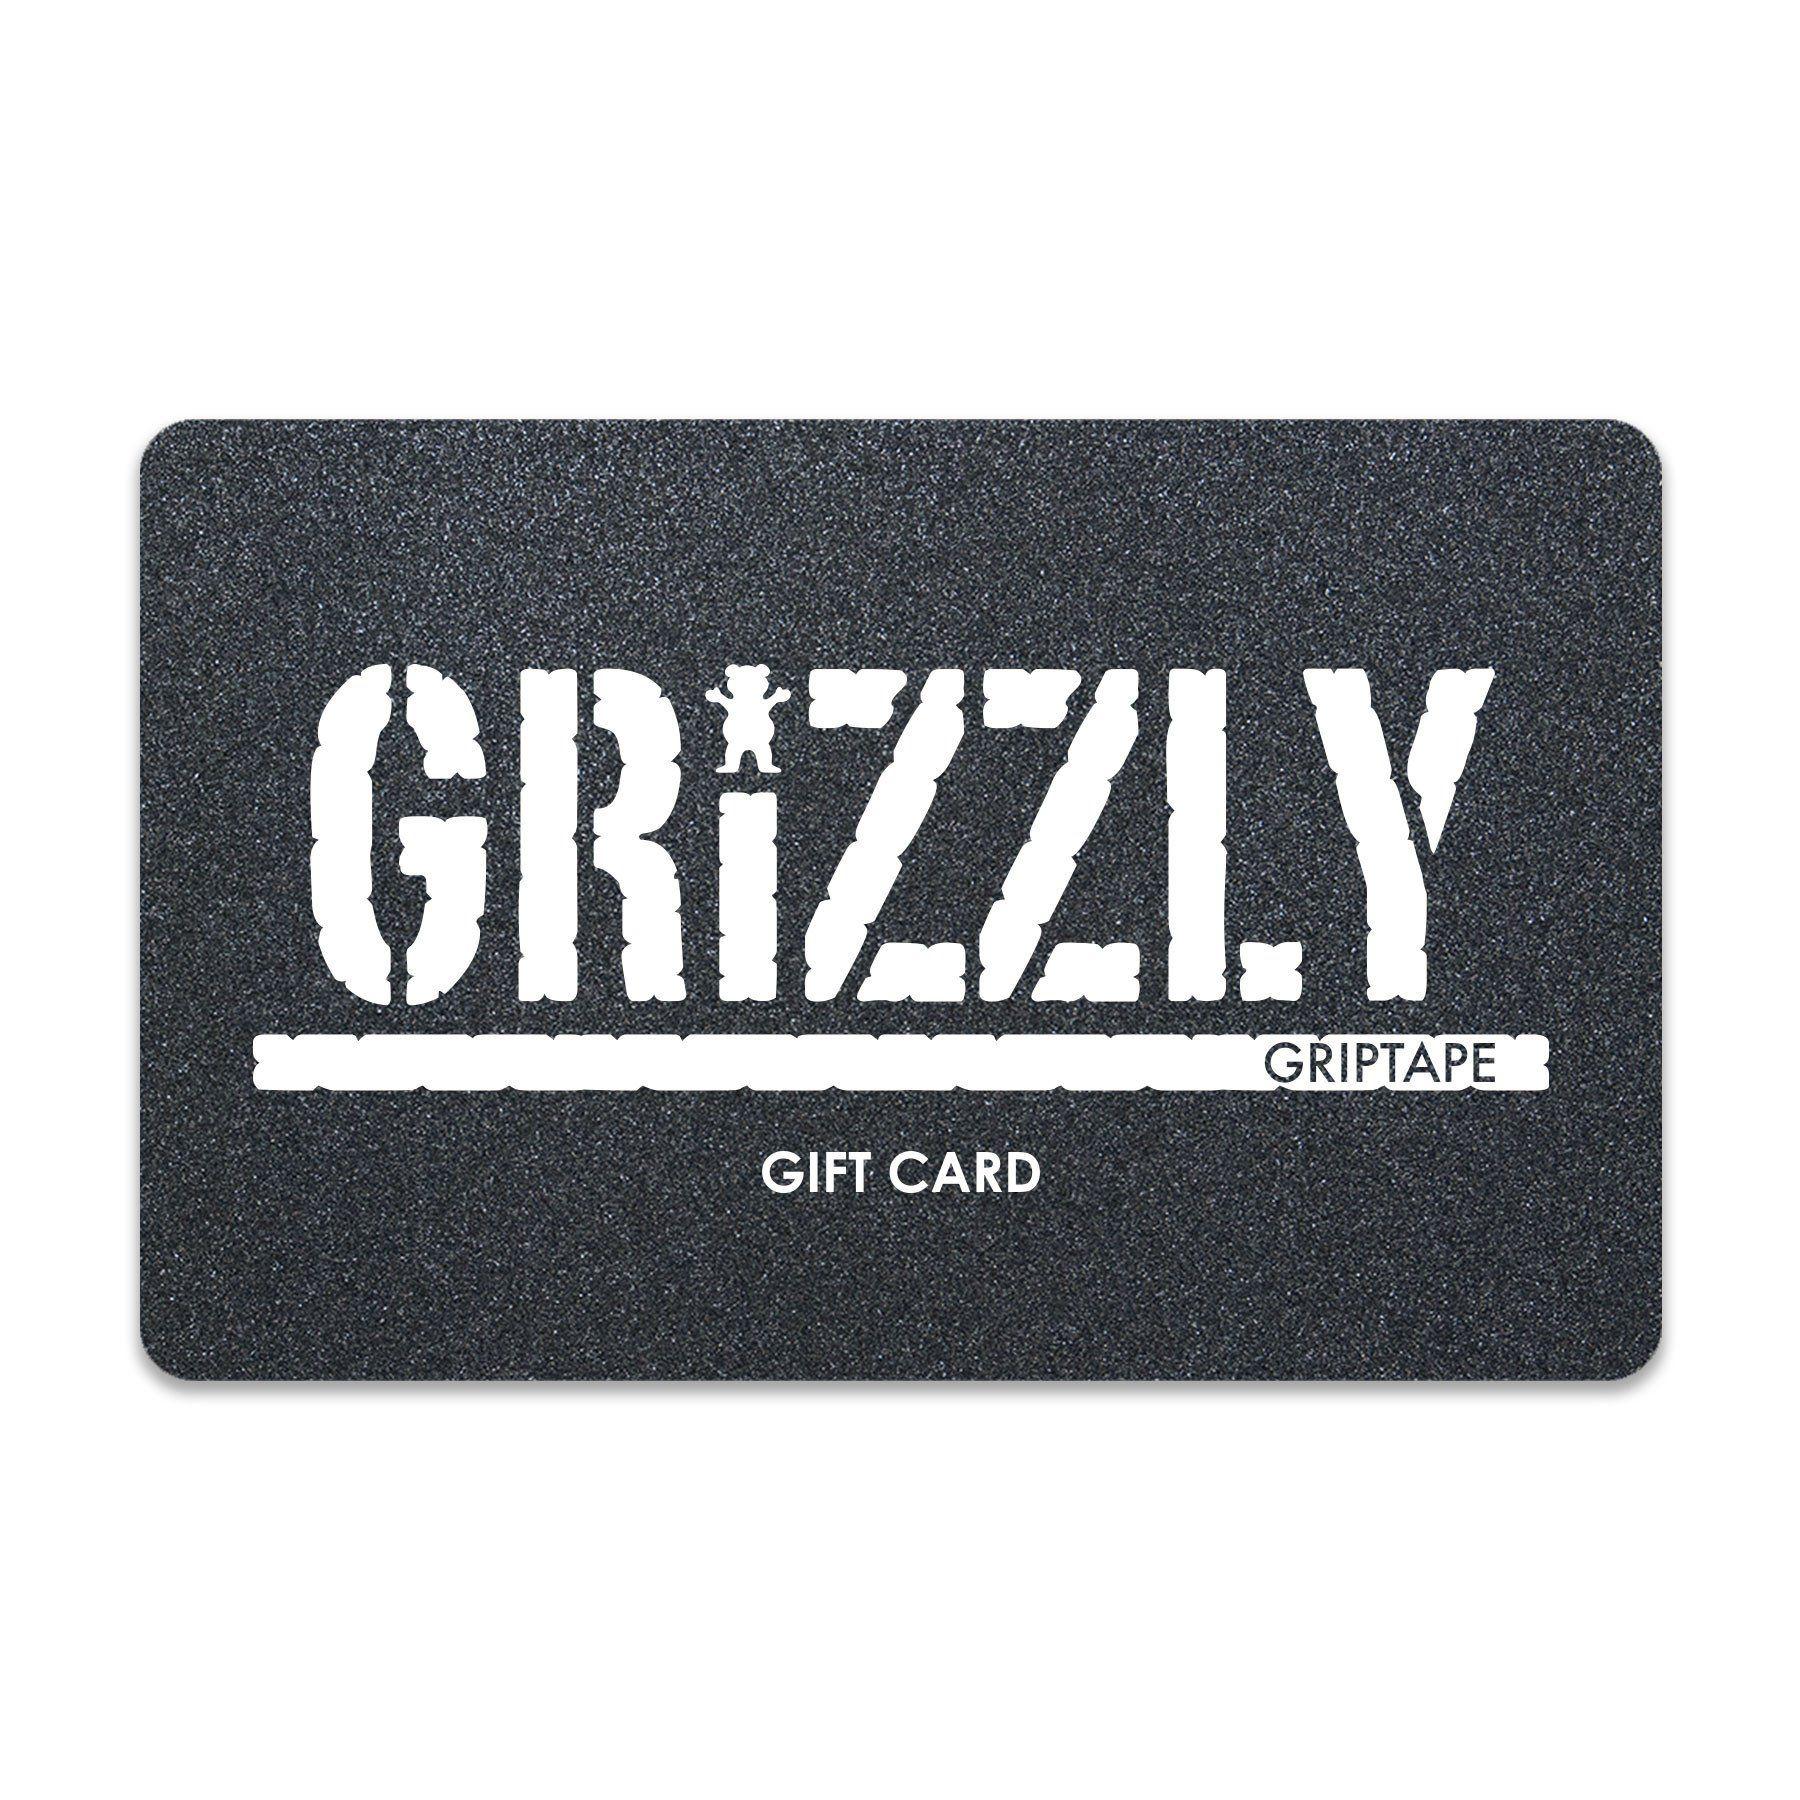 Grizzly Grip Tape Logo - GRIZZLY GRIPTAPE GIFT CARD $50 - Grizzly Griptape